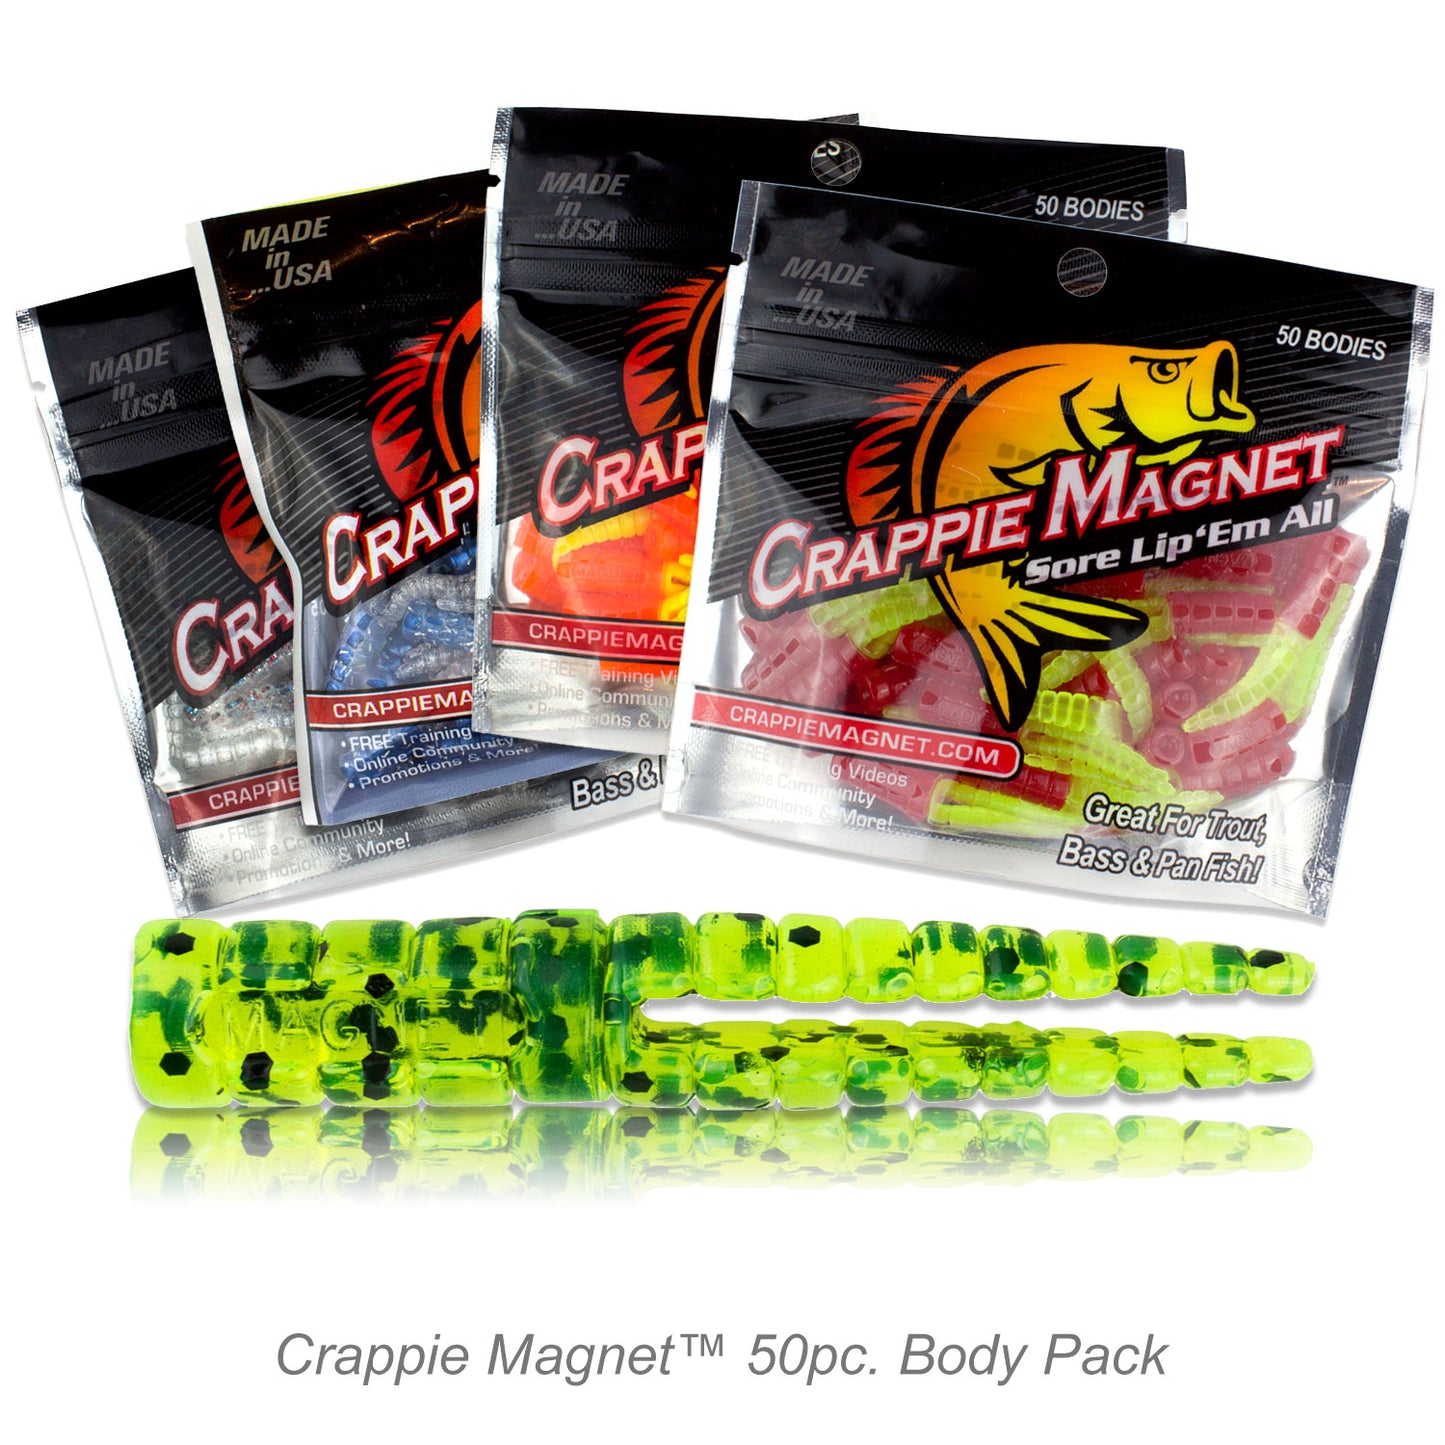 Crappie Magnet  50pc. Body Packs